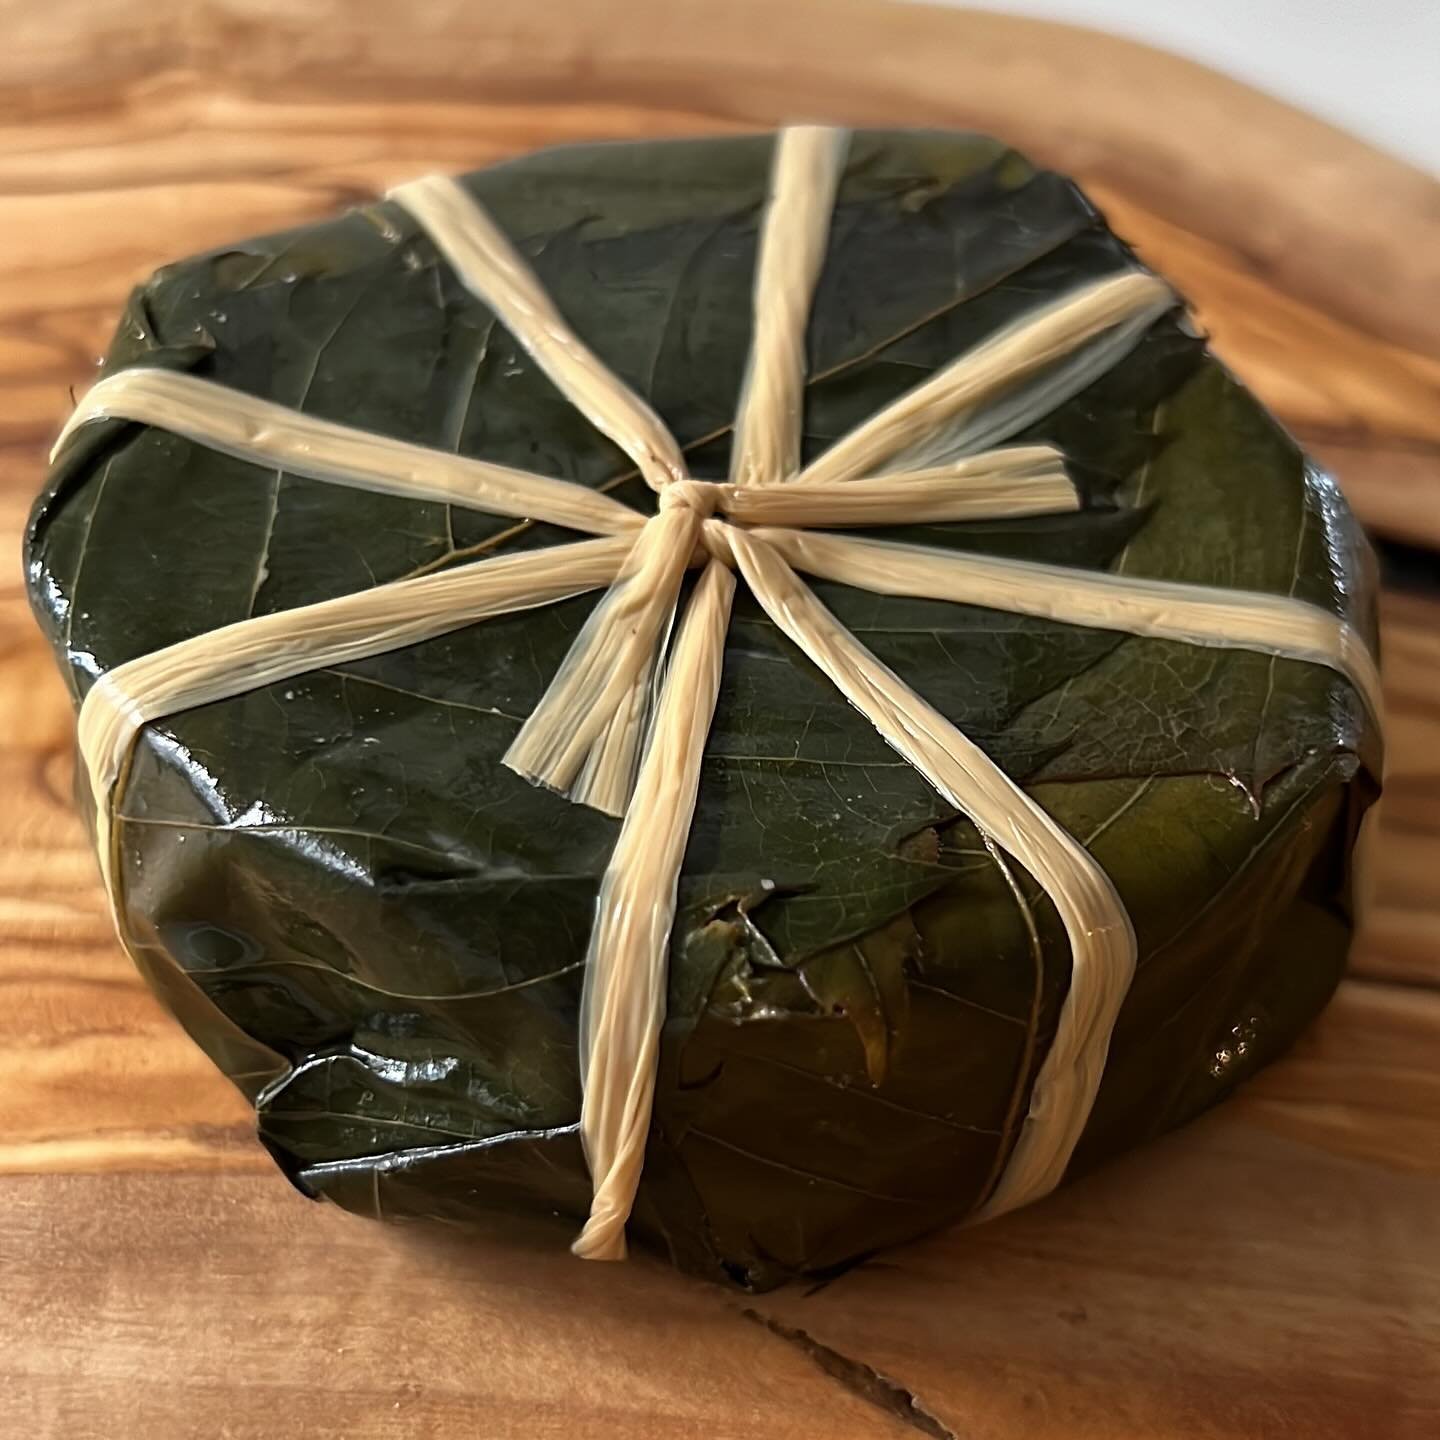 O&rsquo;Banon gives major main character energy. Shrouded in bourbon-soaked chestnut leaves, this fresh goat cheese is the star of the show on any cheese board. Unwrap like a present and enjoy!

Photos by @katnewquist 📸
#obanon #goatcheese #bourbon 